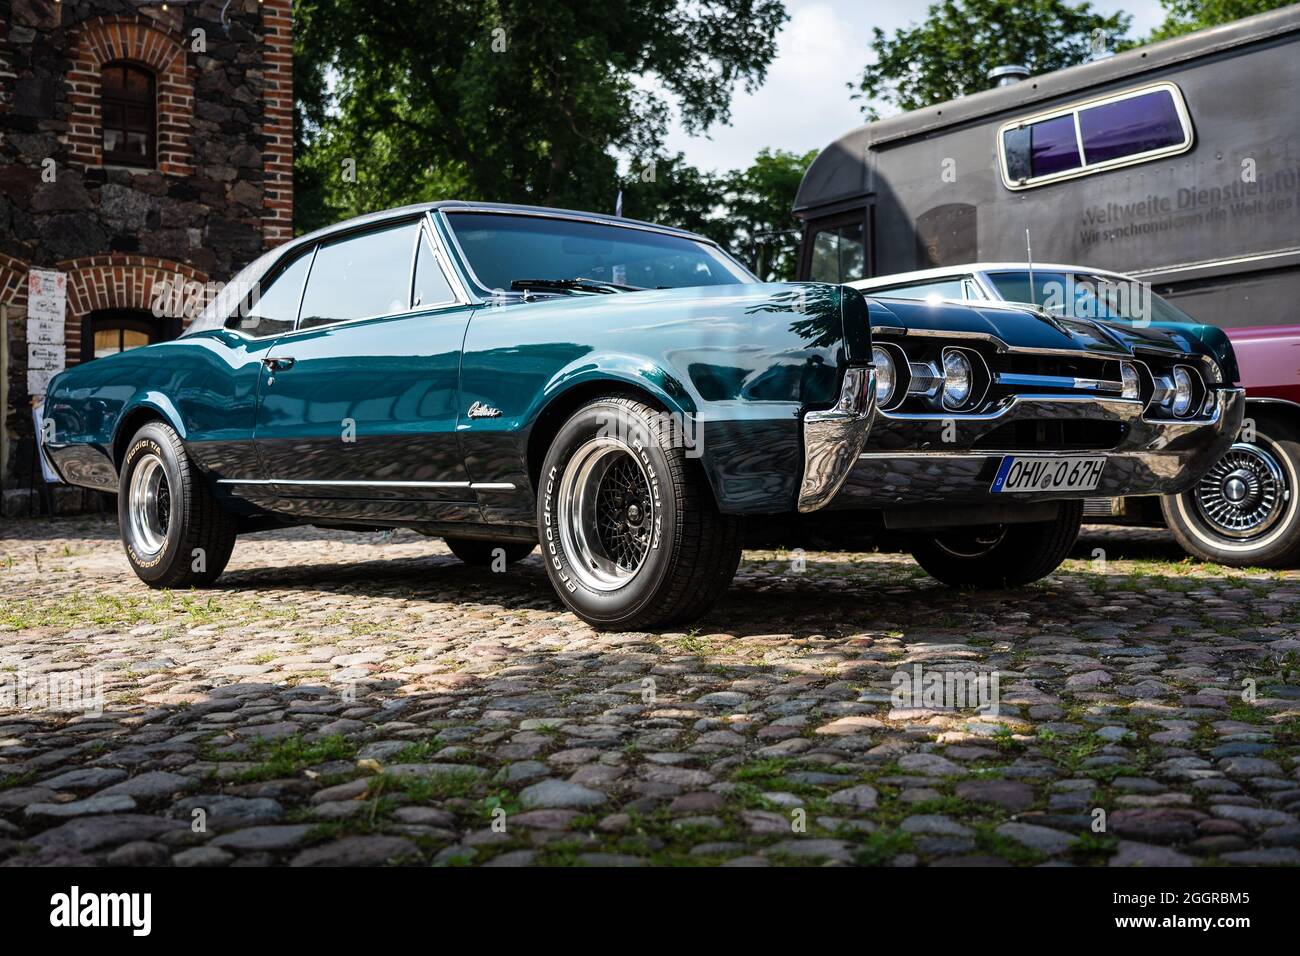 DIEDERSDORF, GERMANY - AUGUST 21, 2021: The mid-size car Oldsmobile Cutlass Hardtop Coupe, 1967. The exhibition of 'US Car Classics'. Stock Photo